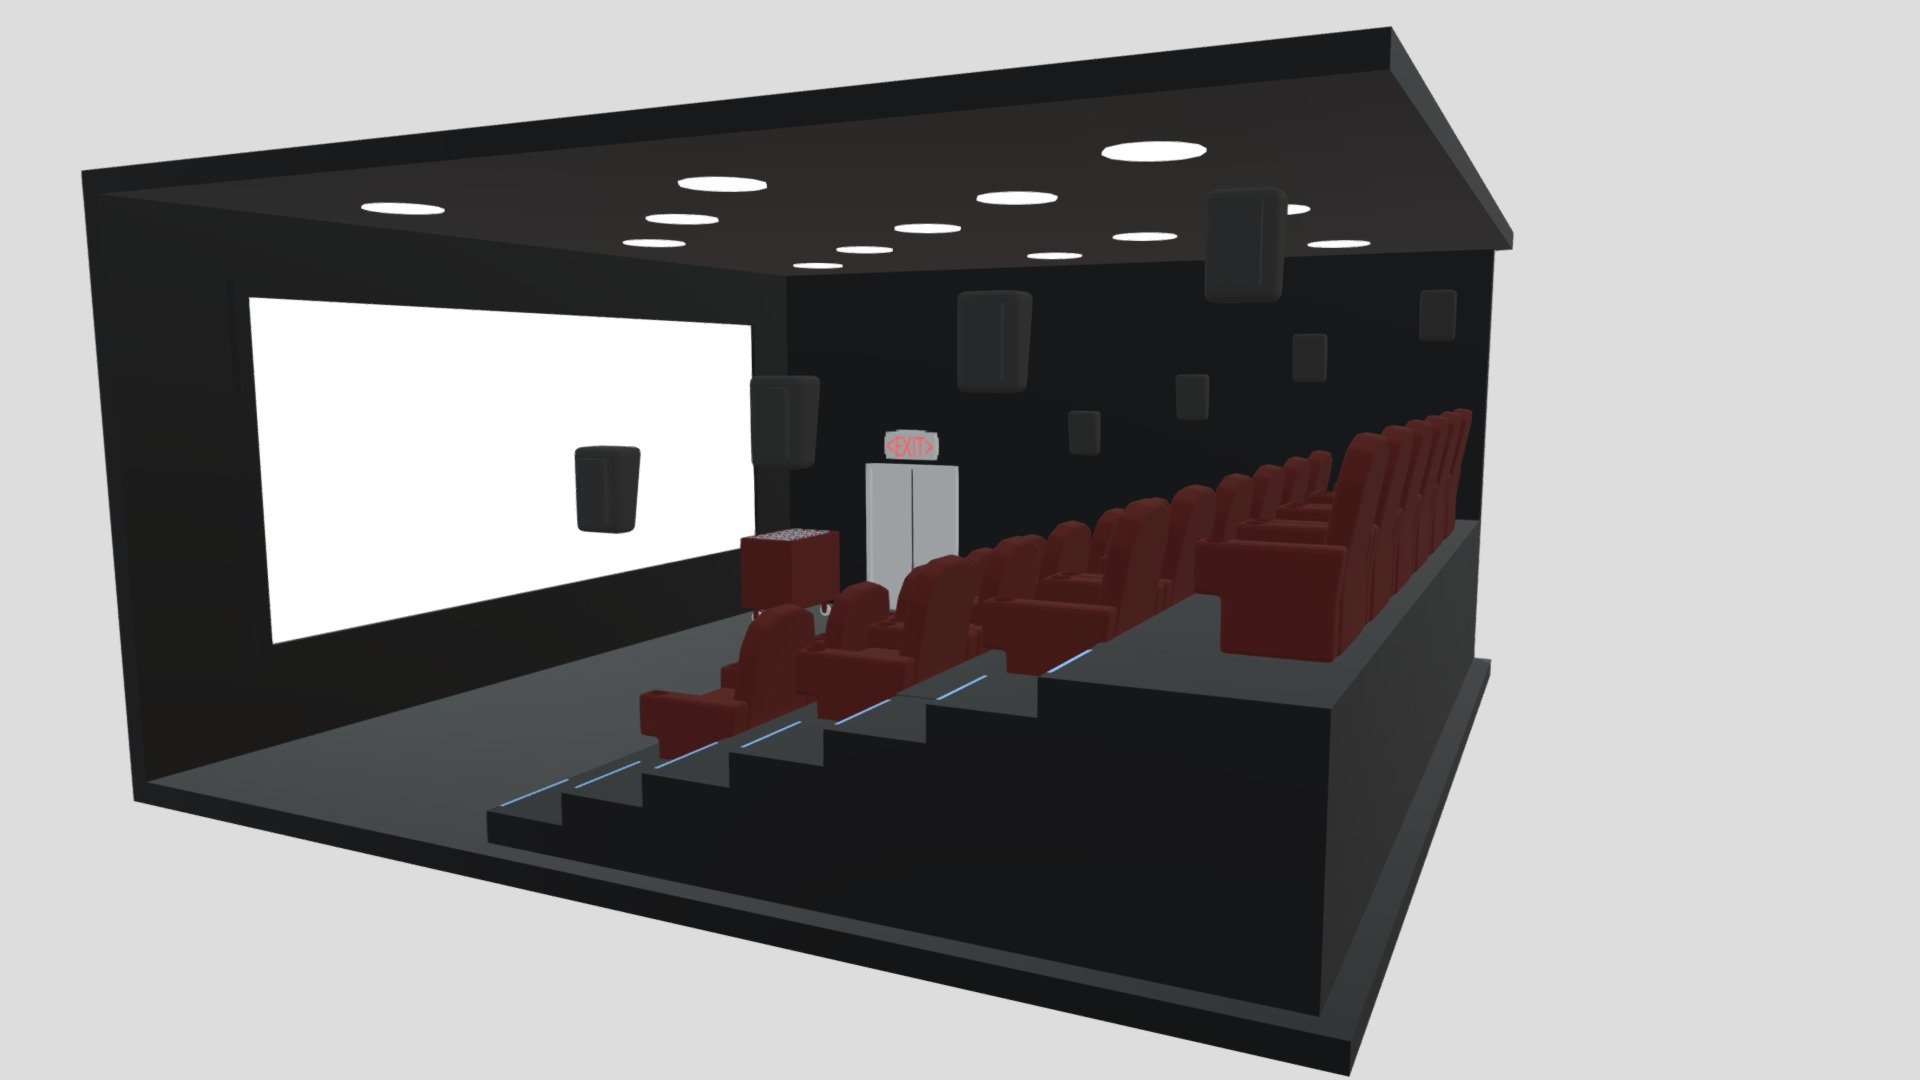 -Movie Theater.

-This product contains 66 models.

-18 Seats, 18 3D Glasses, 6 Loudspeaker Box,

-This product was created in Blender 2.8.

-Total vertices 18,321. Total polygons 16,979;

-Formats: . blend . fbx . obj, c4d,dae,fbx,unity.

-Thank you 3d model